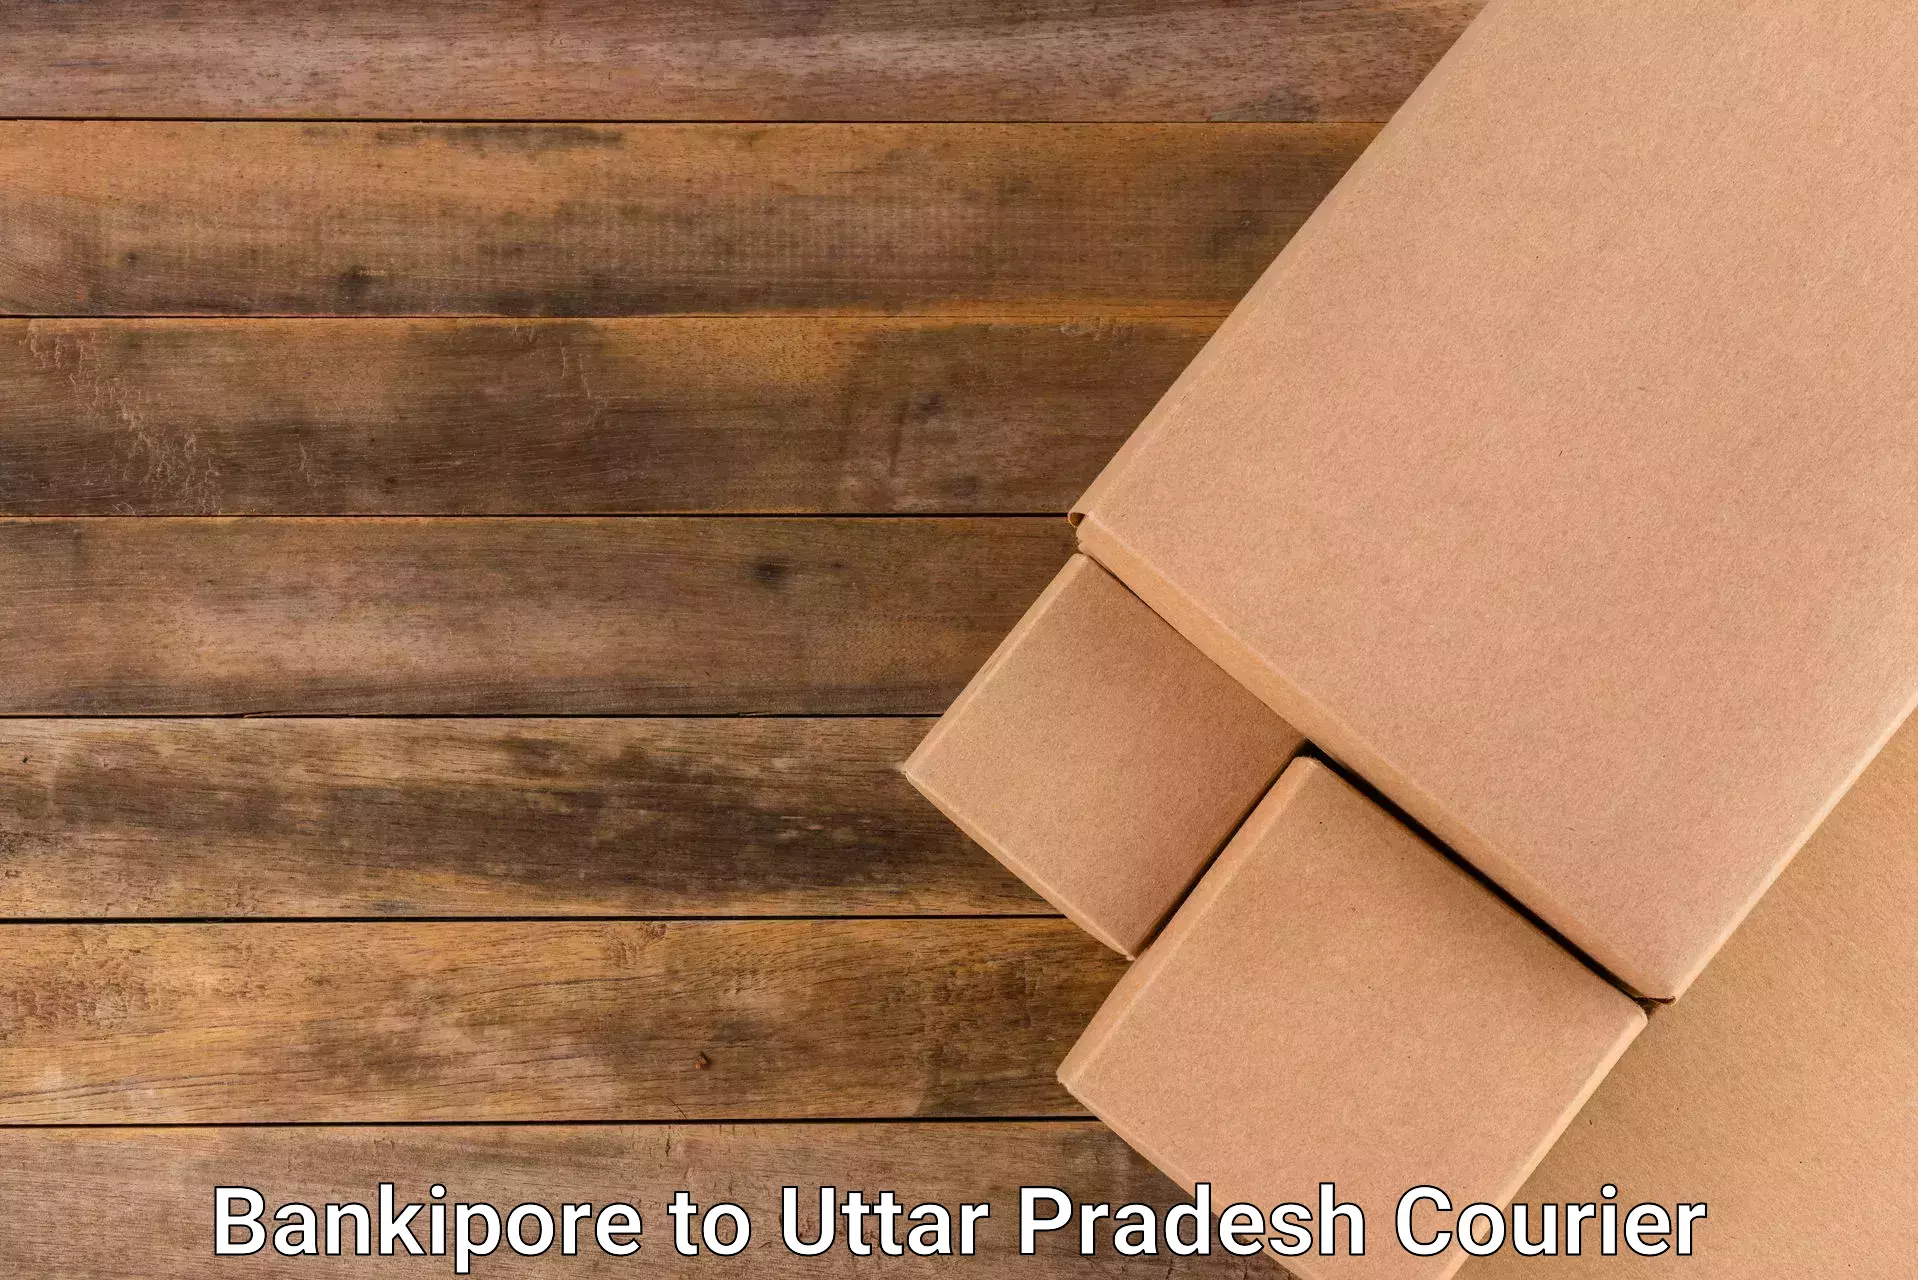 Multi-service courier options in Bankipore to Behat